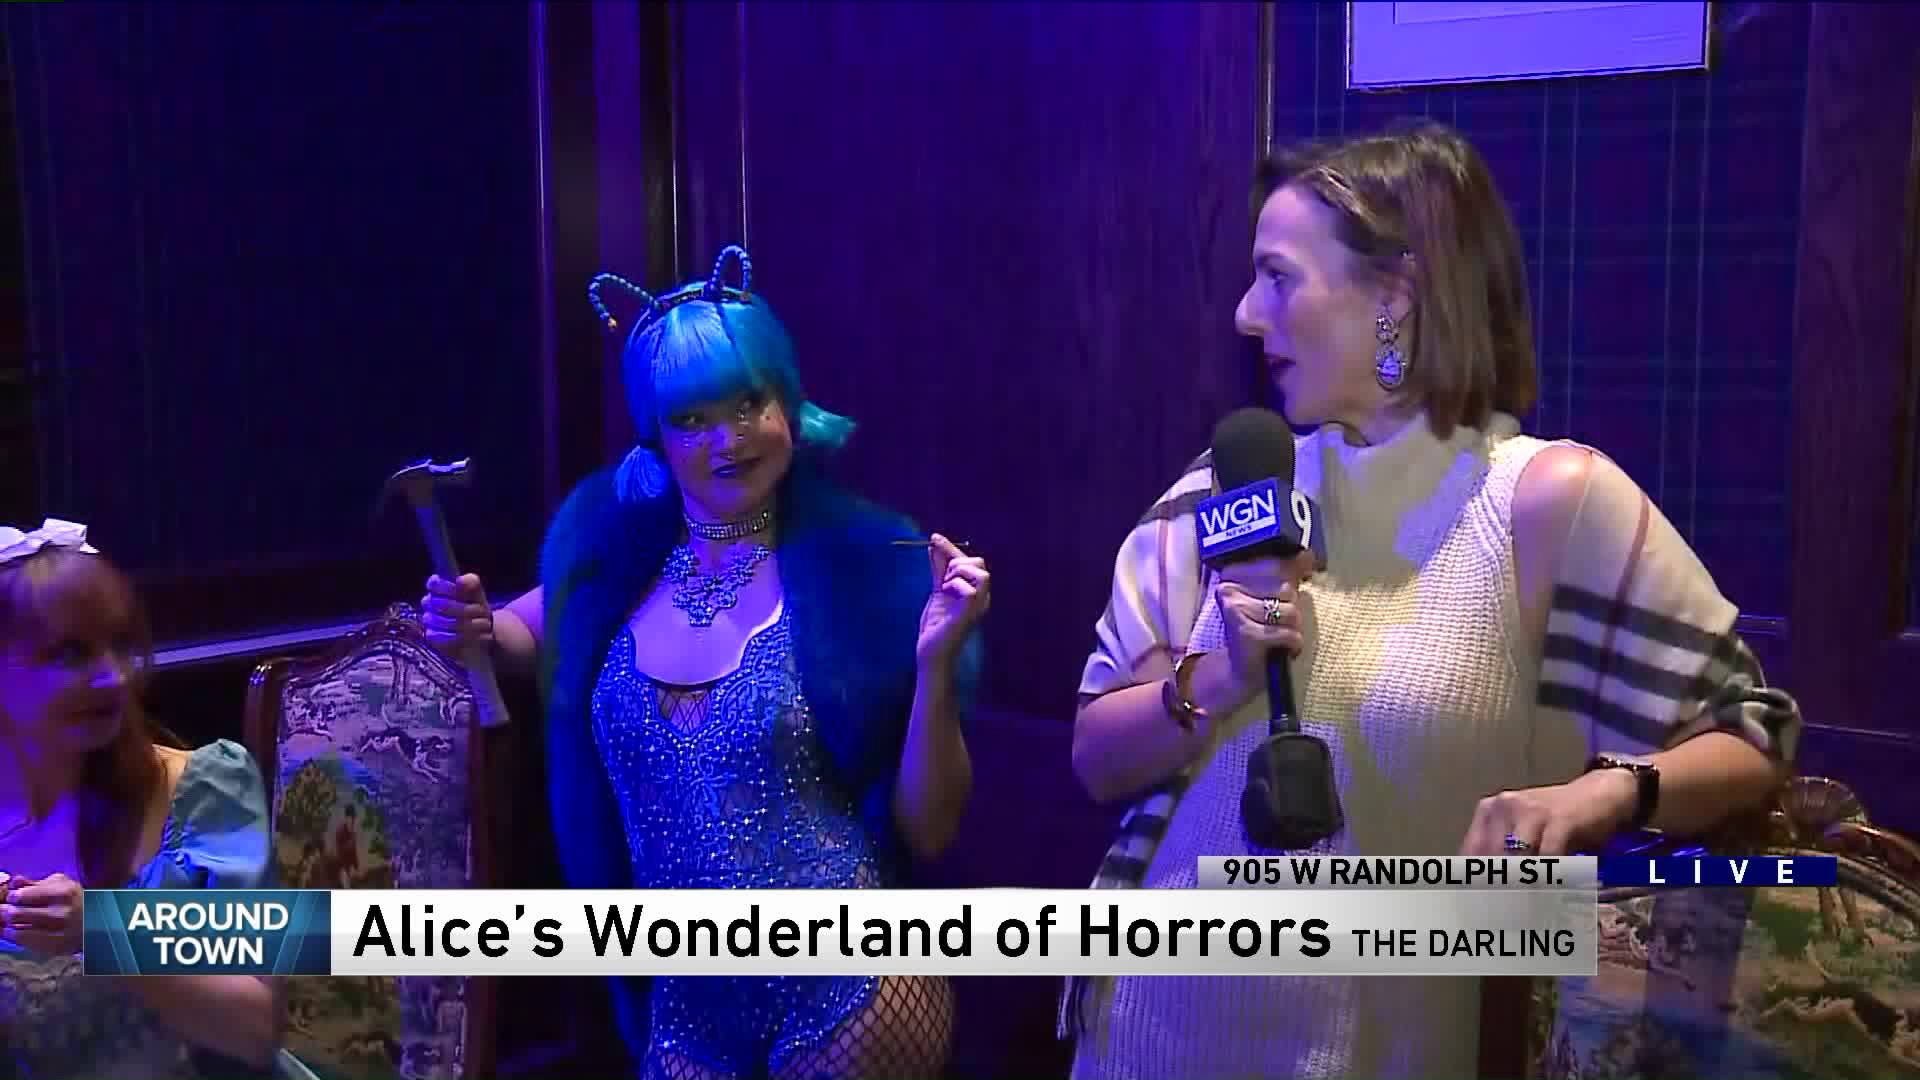 Around Town checks out Alice’s Wonderland of Horrors, just in time for Halloween